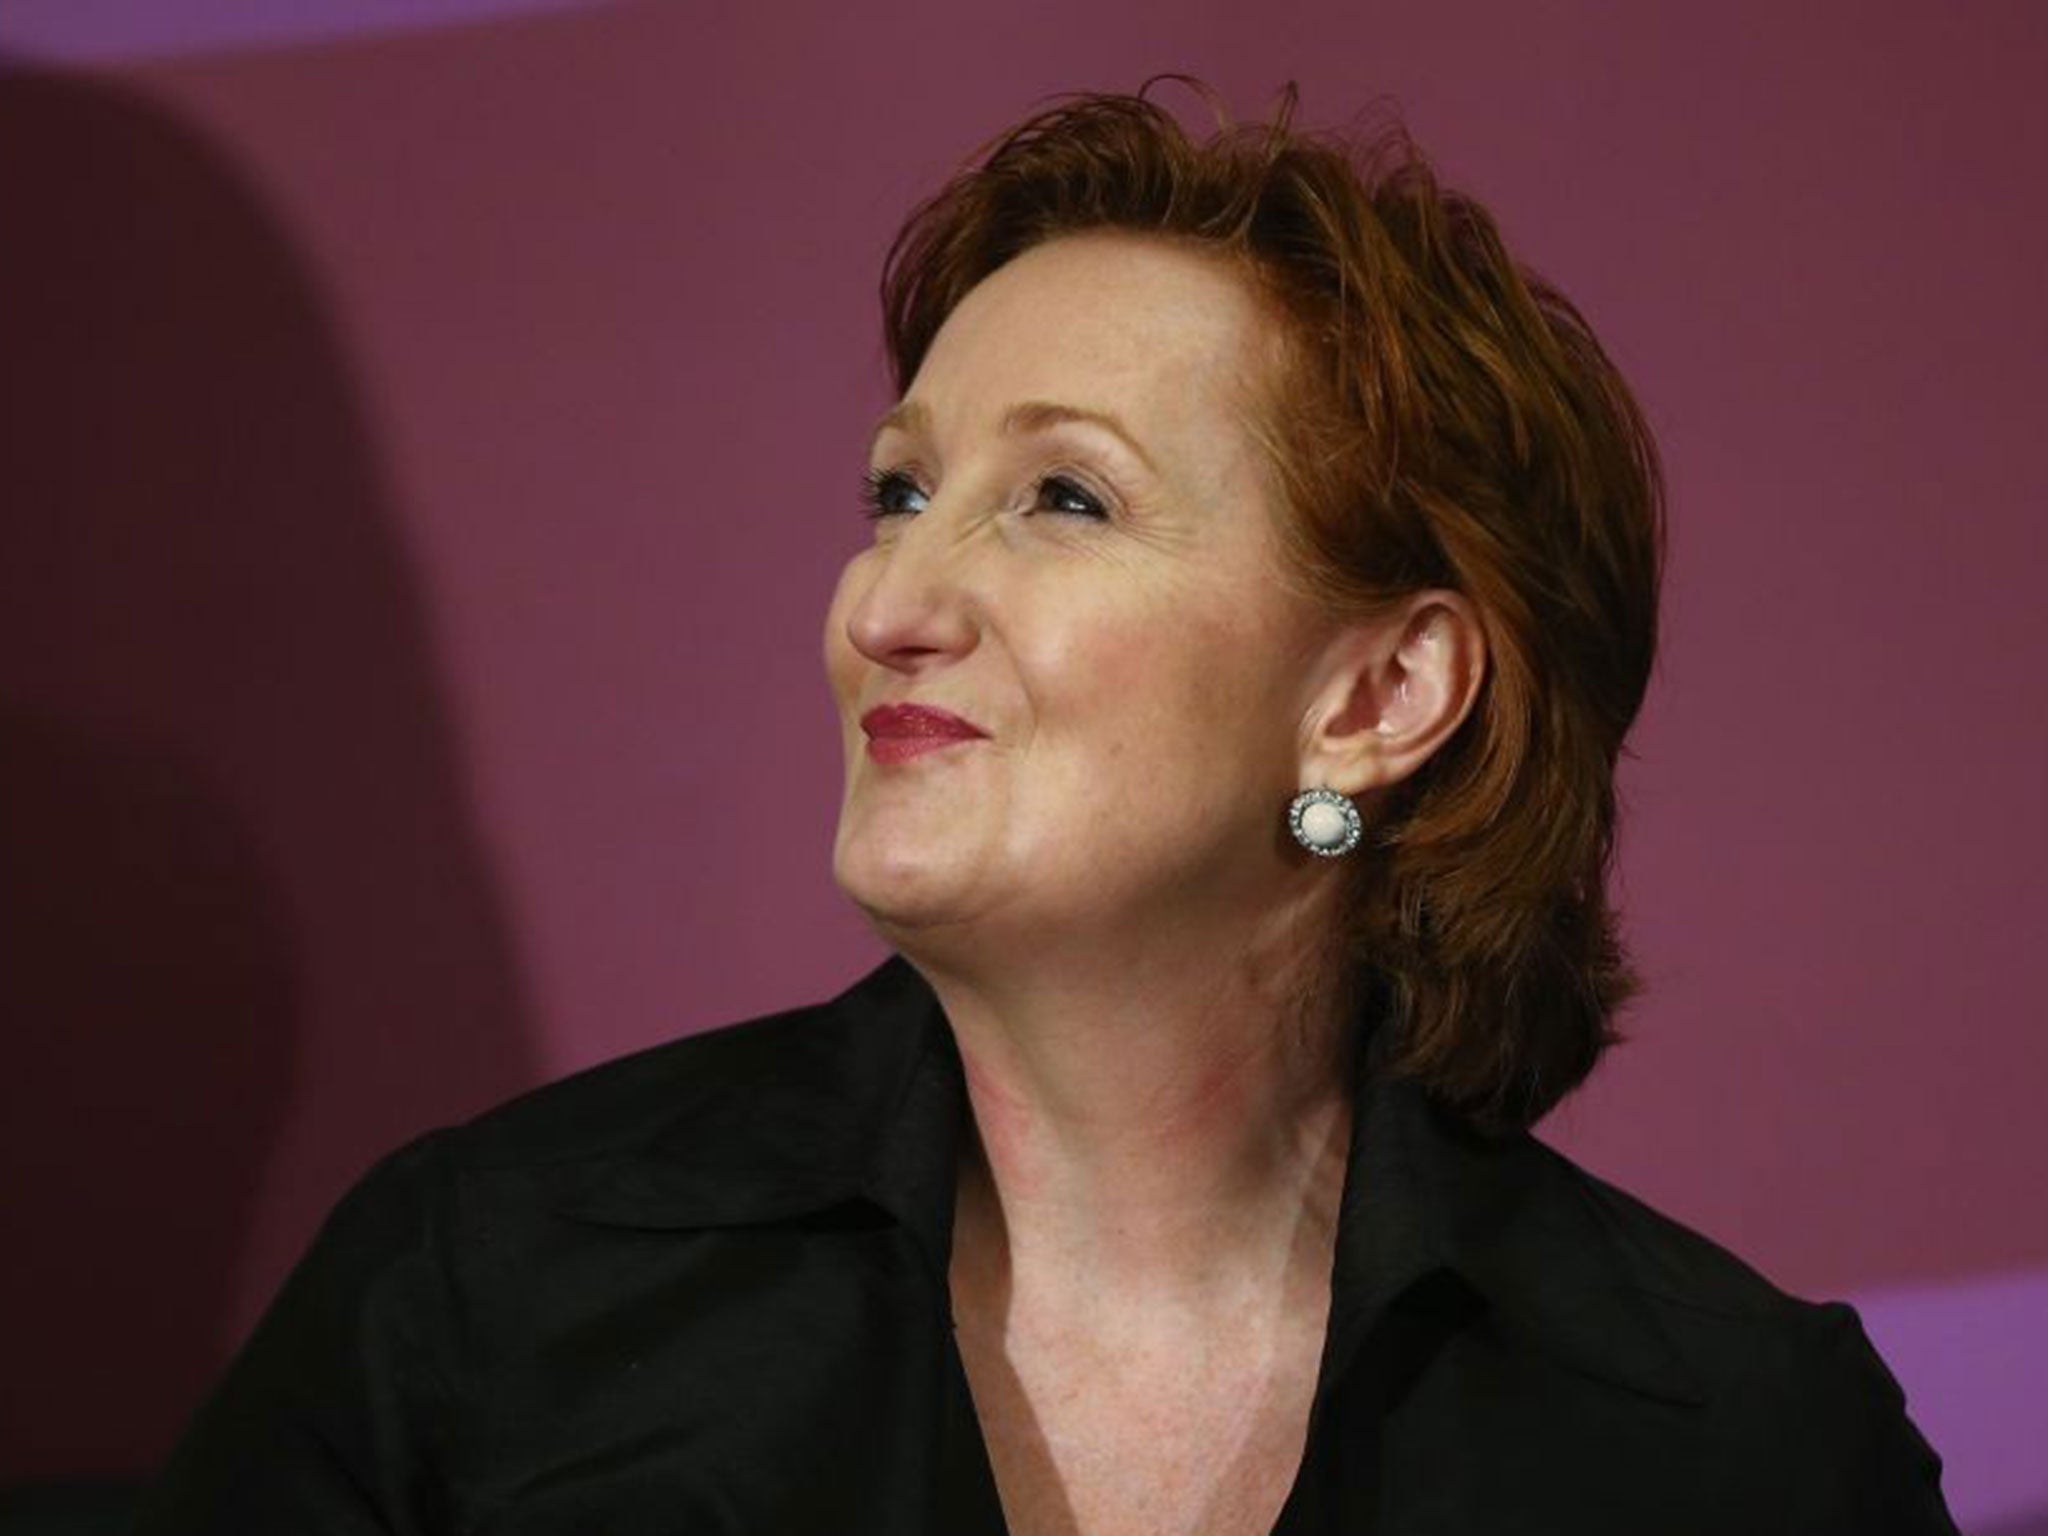 Ukip's deputy chairman and communities spokesperson Suzanne Evans is one of the rising stars of the party